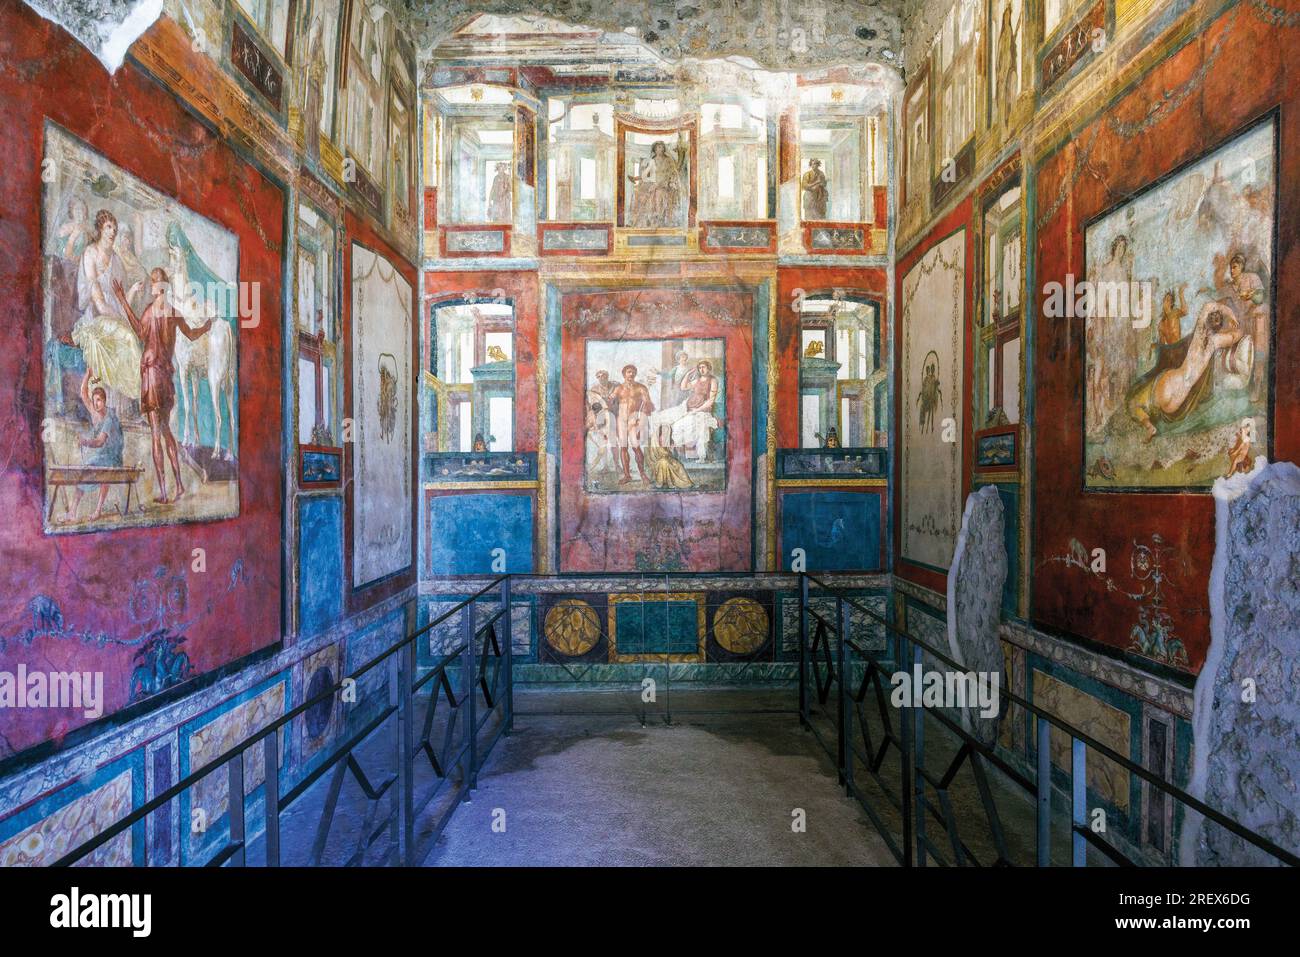 Pompeii Archaeological Site, Campania, Italy.  The triclinium, or dining room with its frescoes of Greek mythological scenes.  The room is also known Stock Photo